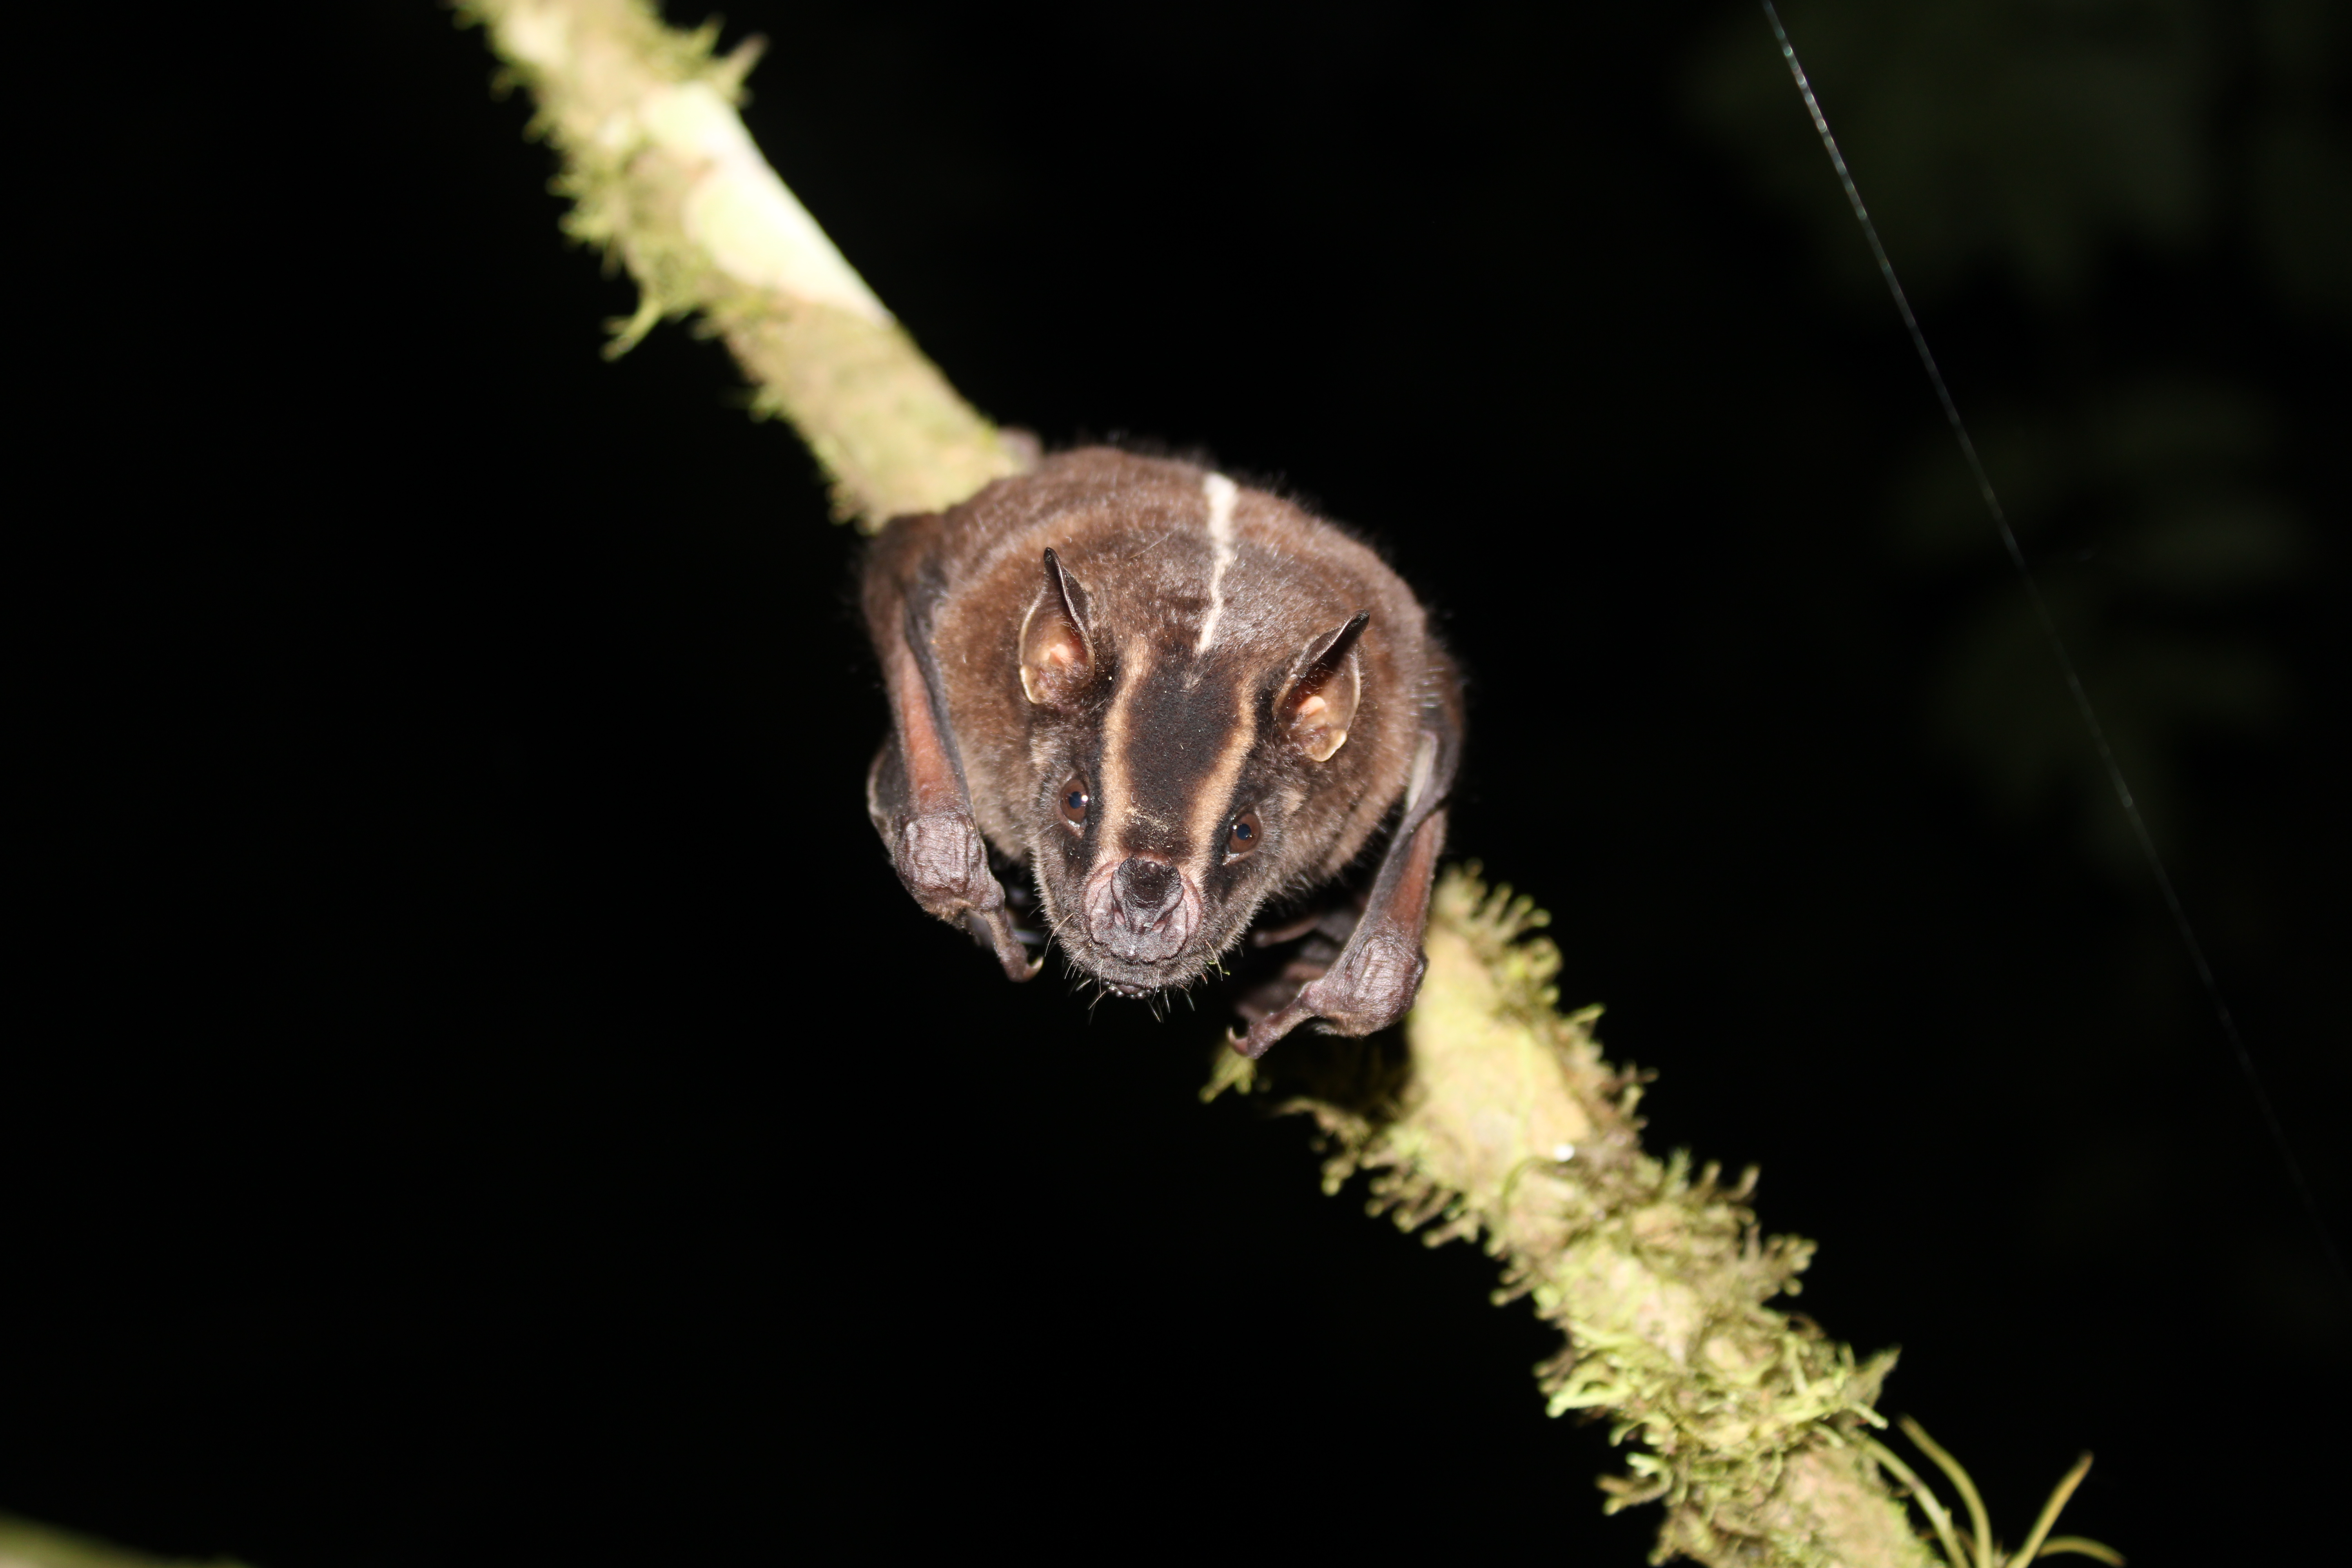 Buenaventura: an area of importance for protecting bats